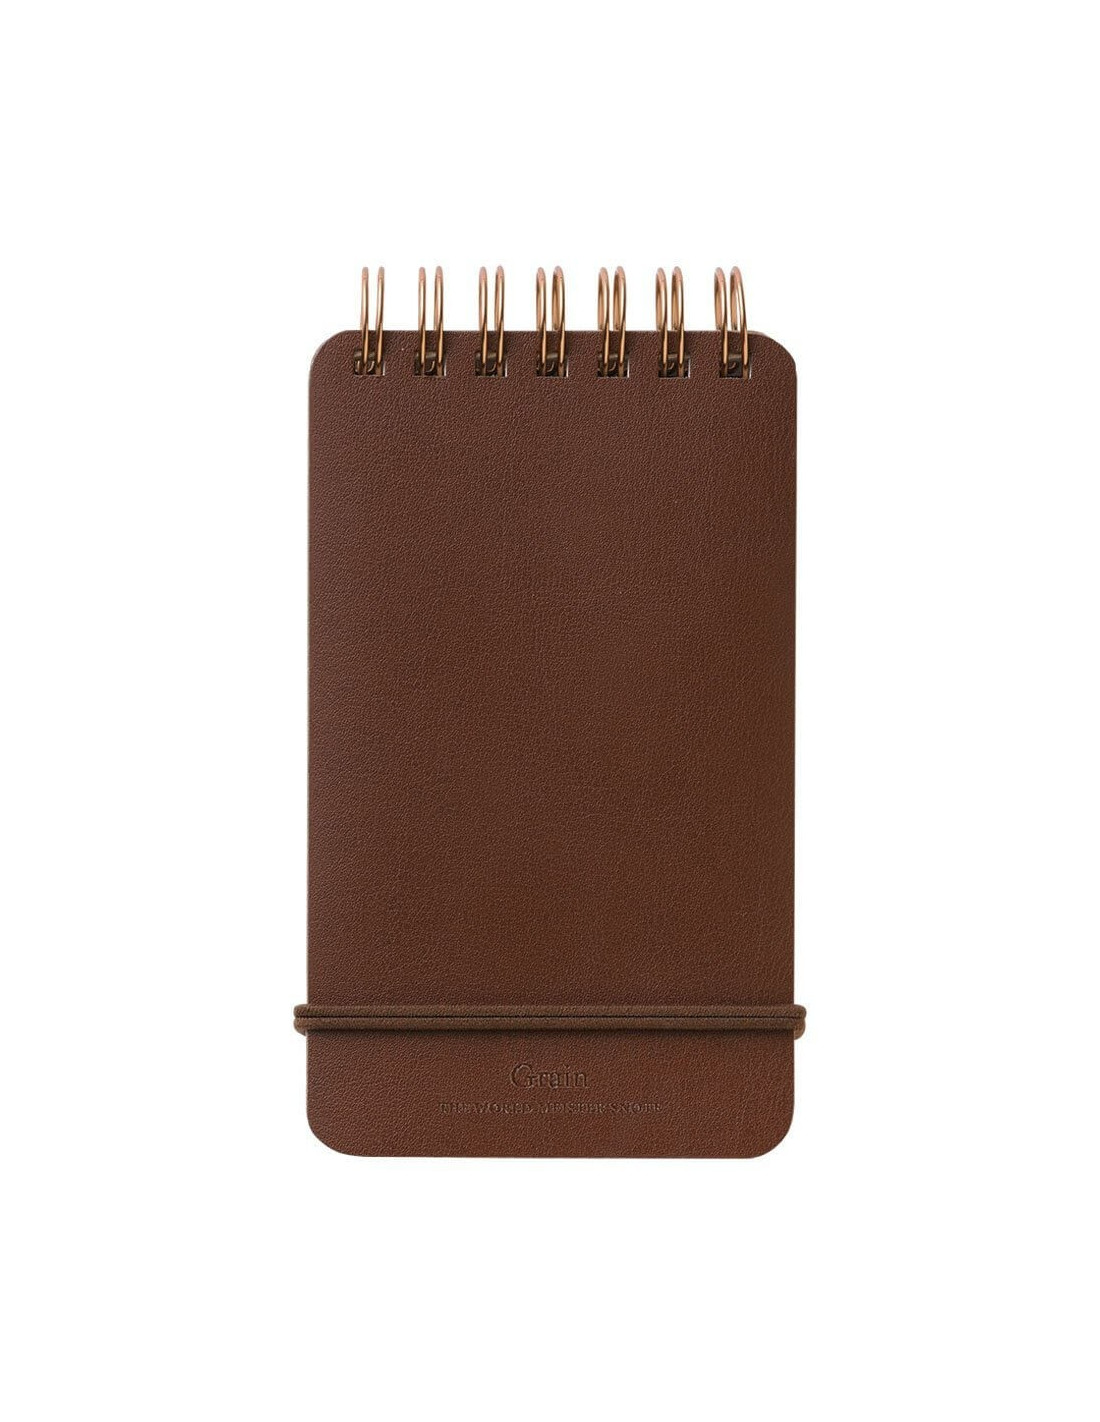 Carnet reporter The World Meister's Products - Marron - Midori